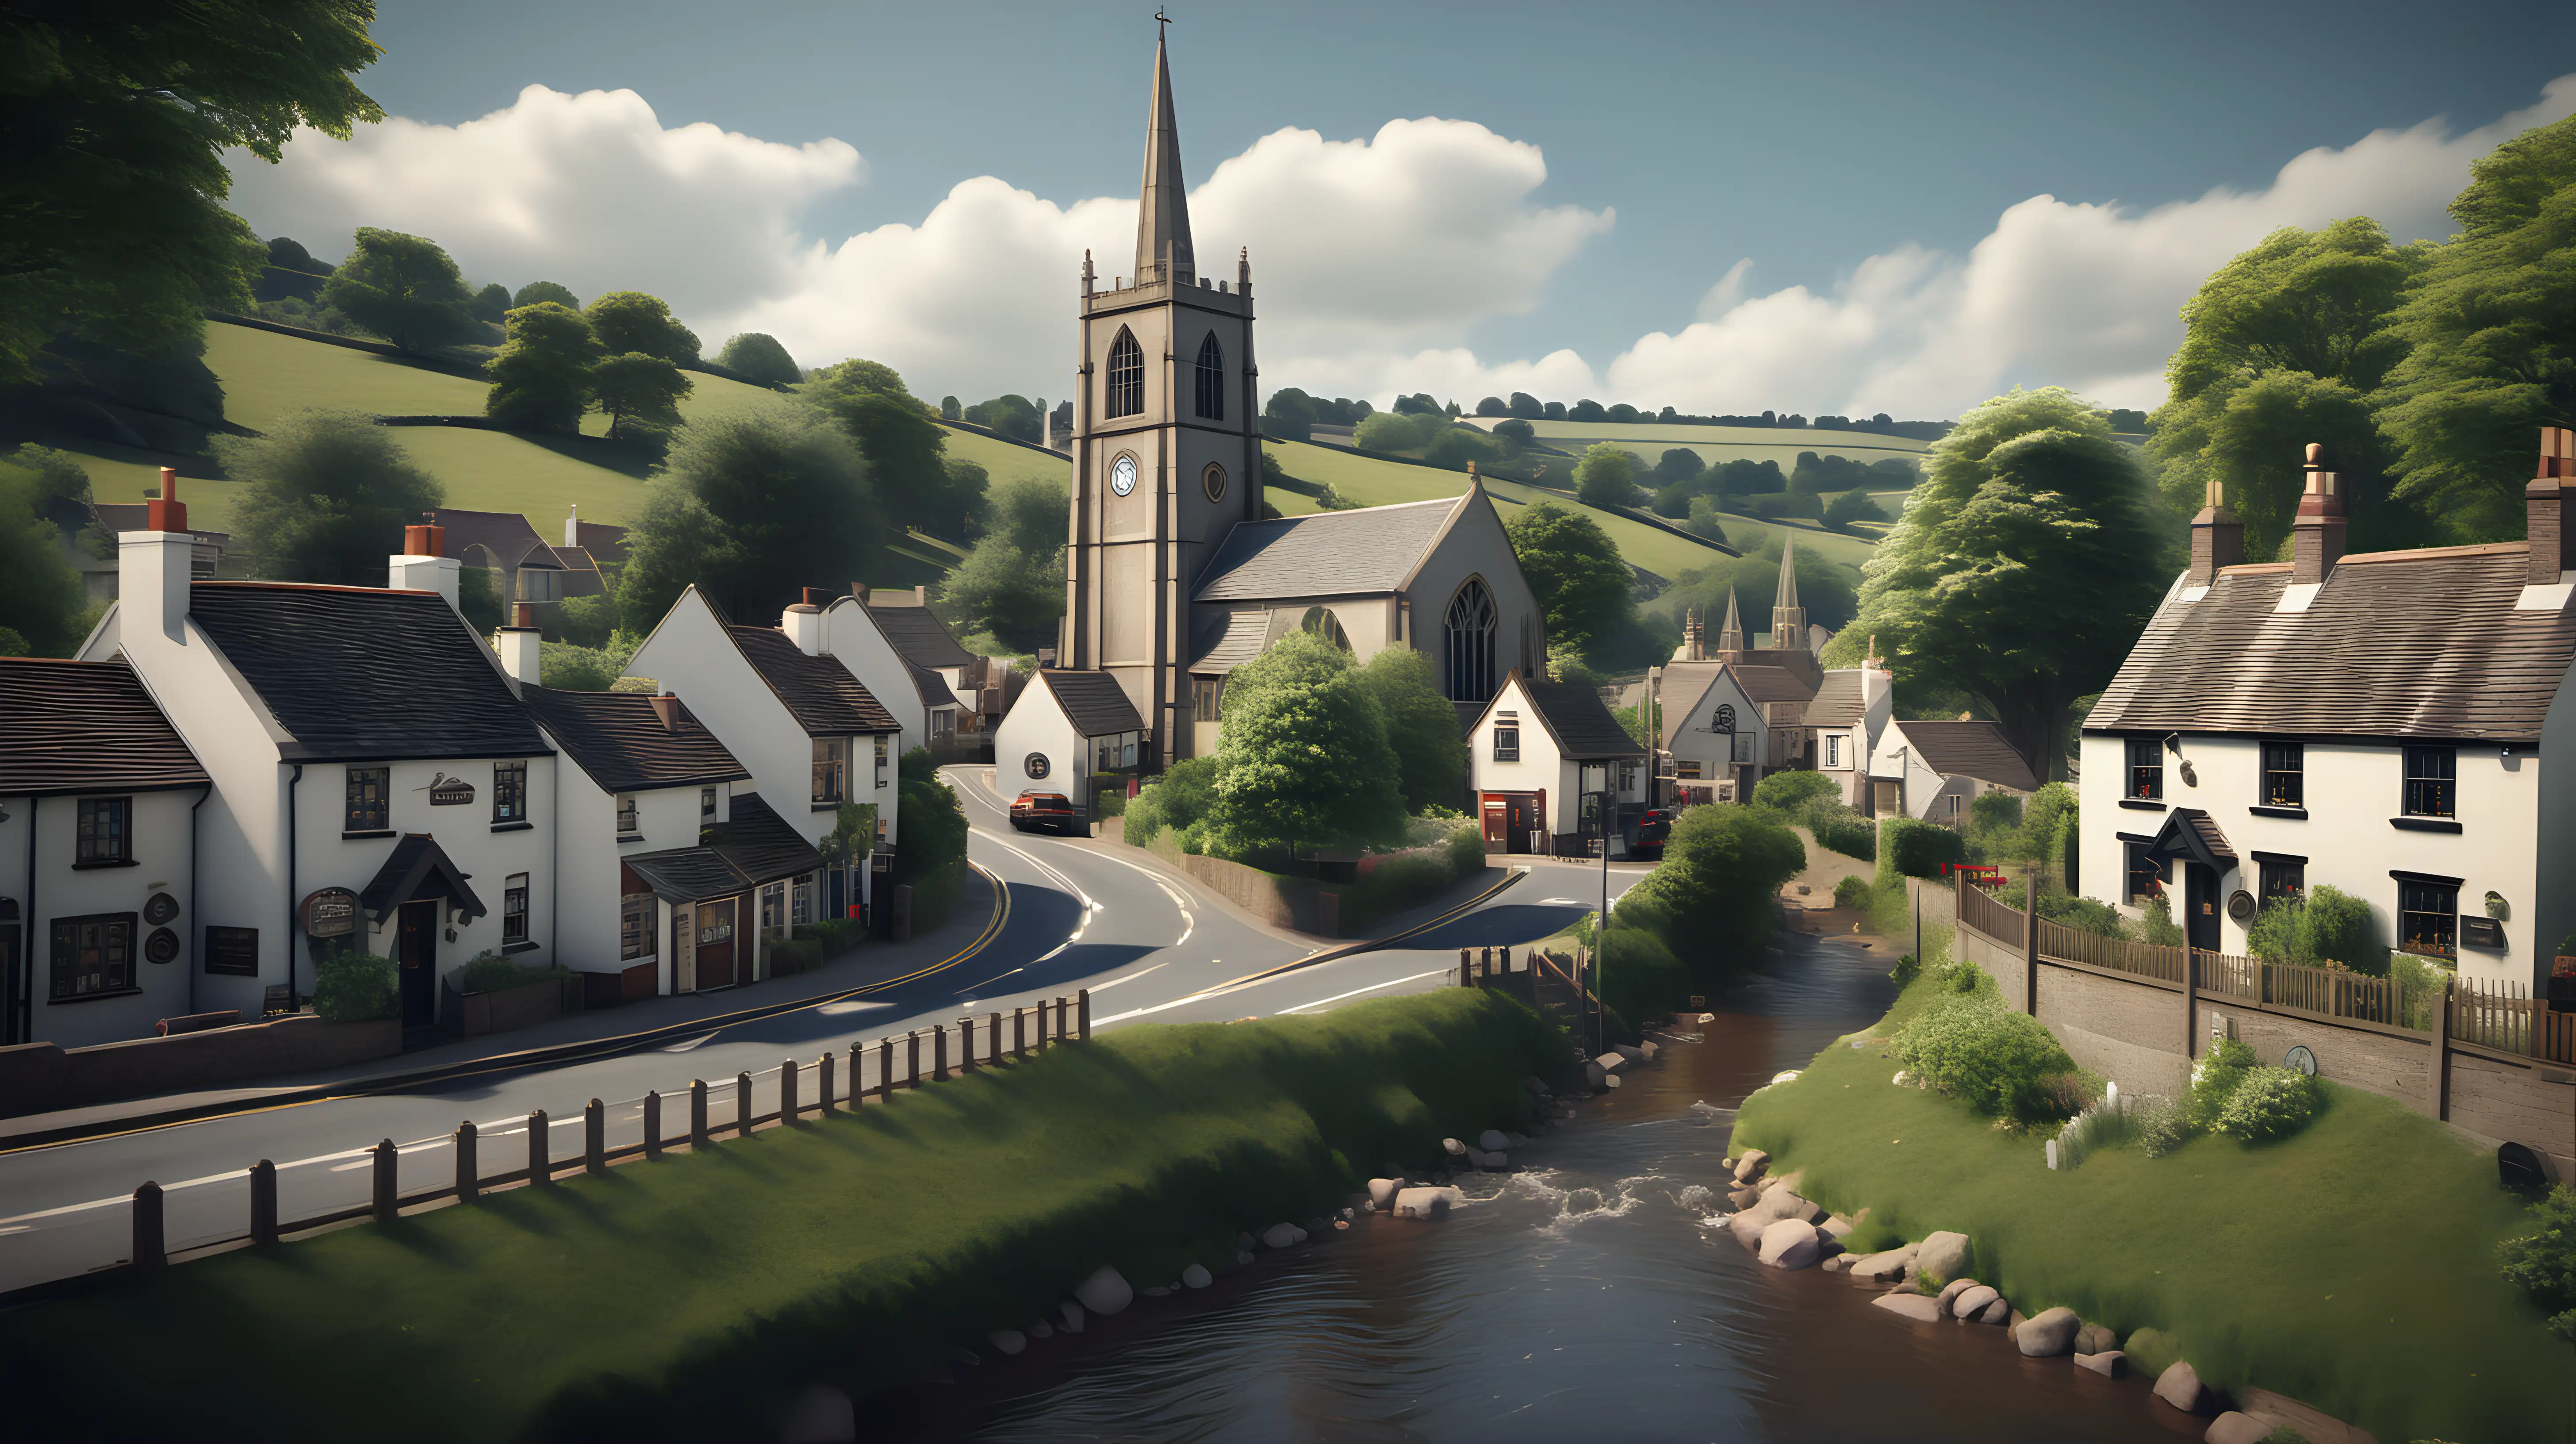 UltraRealistic English Village Scene with Church Houses Pub and River